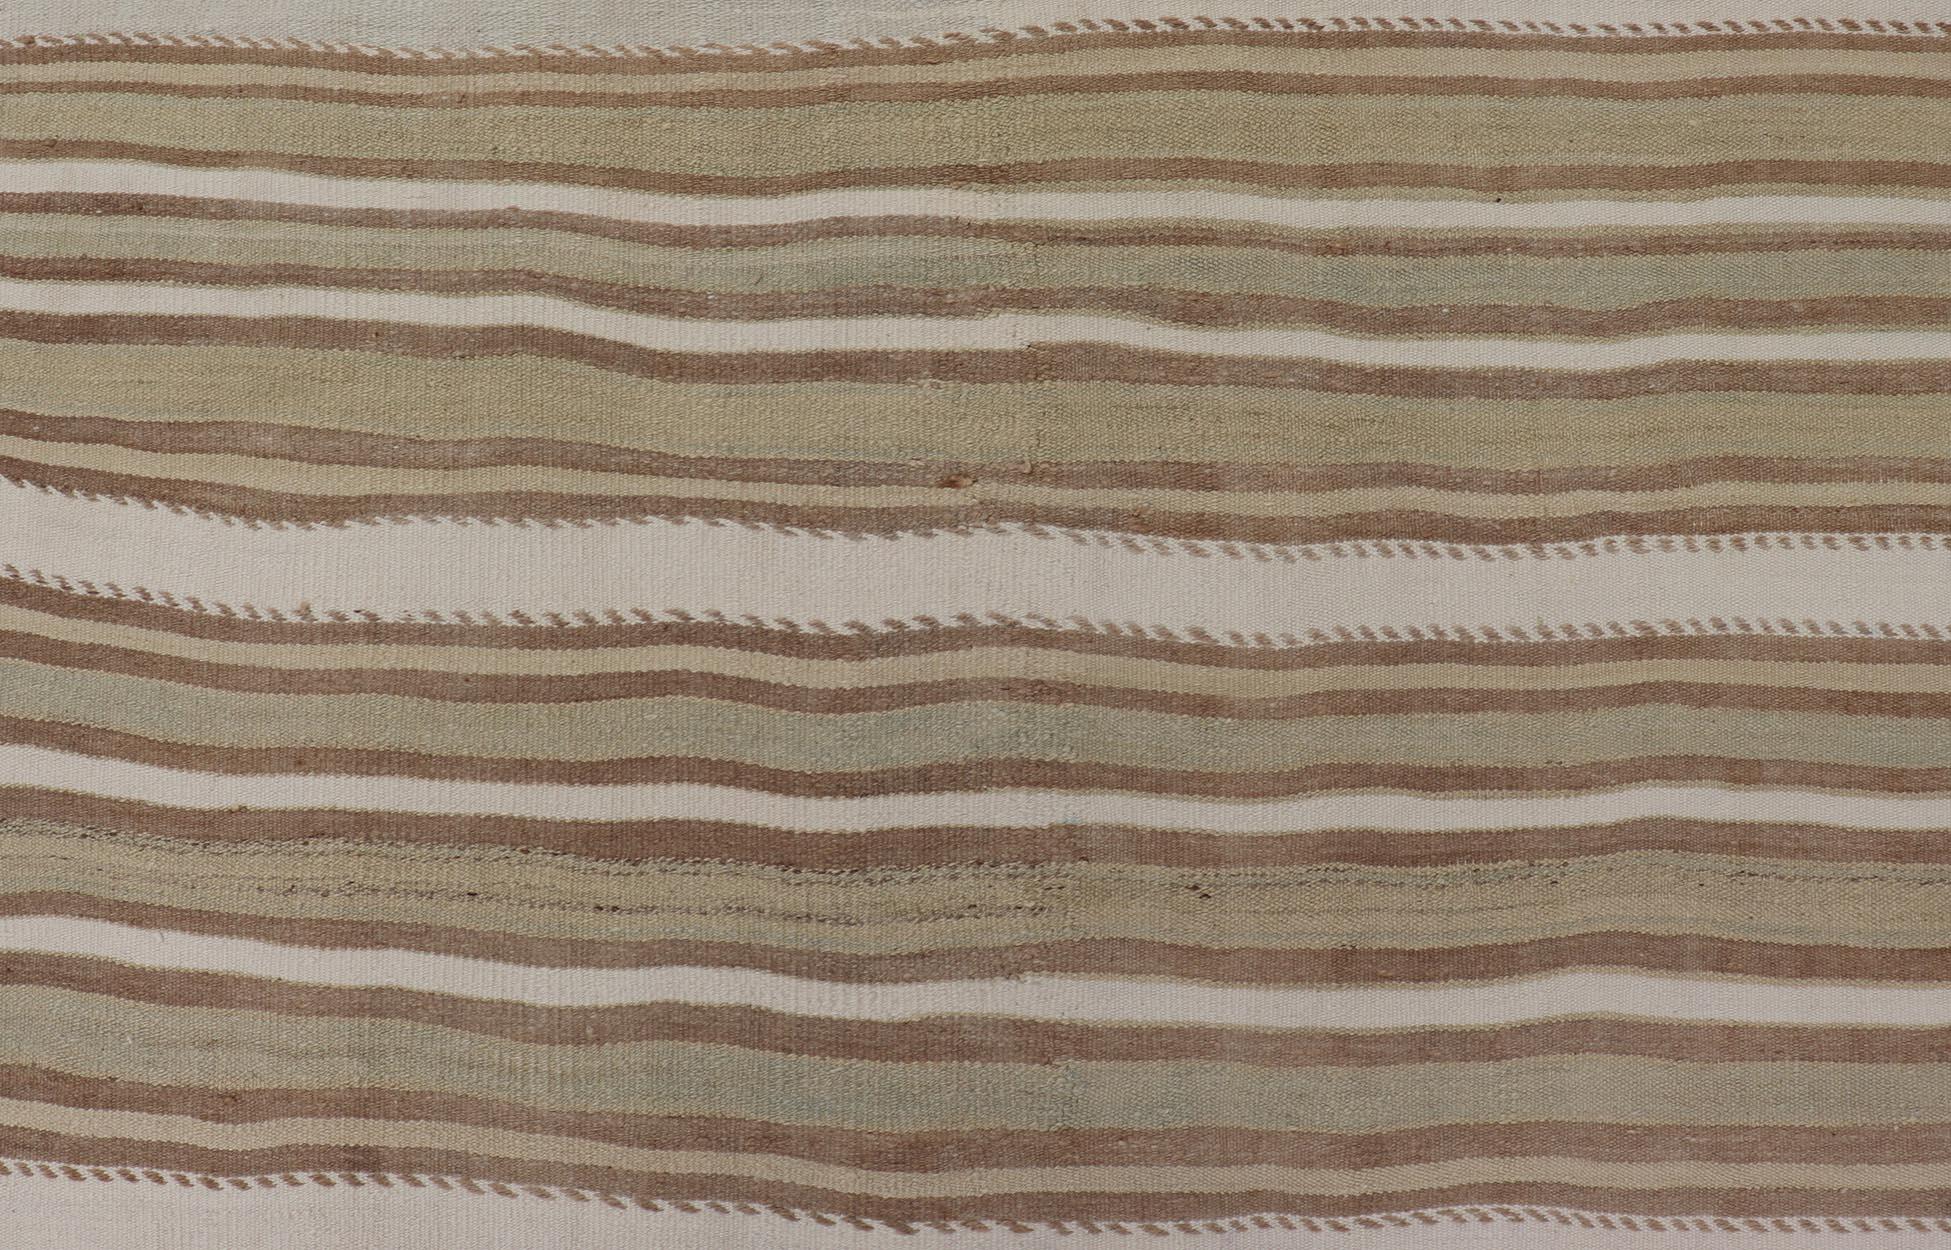 Striped Flat-Weave Vintage Turkish Kilim in Green, Cream, brown and Tan. Keivan Woven Arts / rug EN-15245, country of origin / type: Turkey / Kilim, circa 1950

Measures: 4'11 x 8'1 

This lightly-colored Turkish Kilim is flat-woven in a